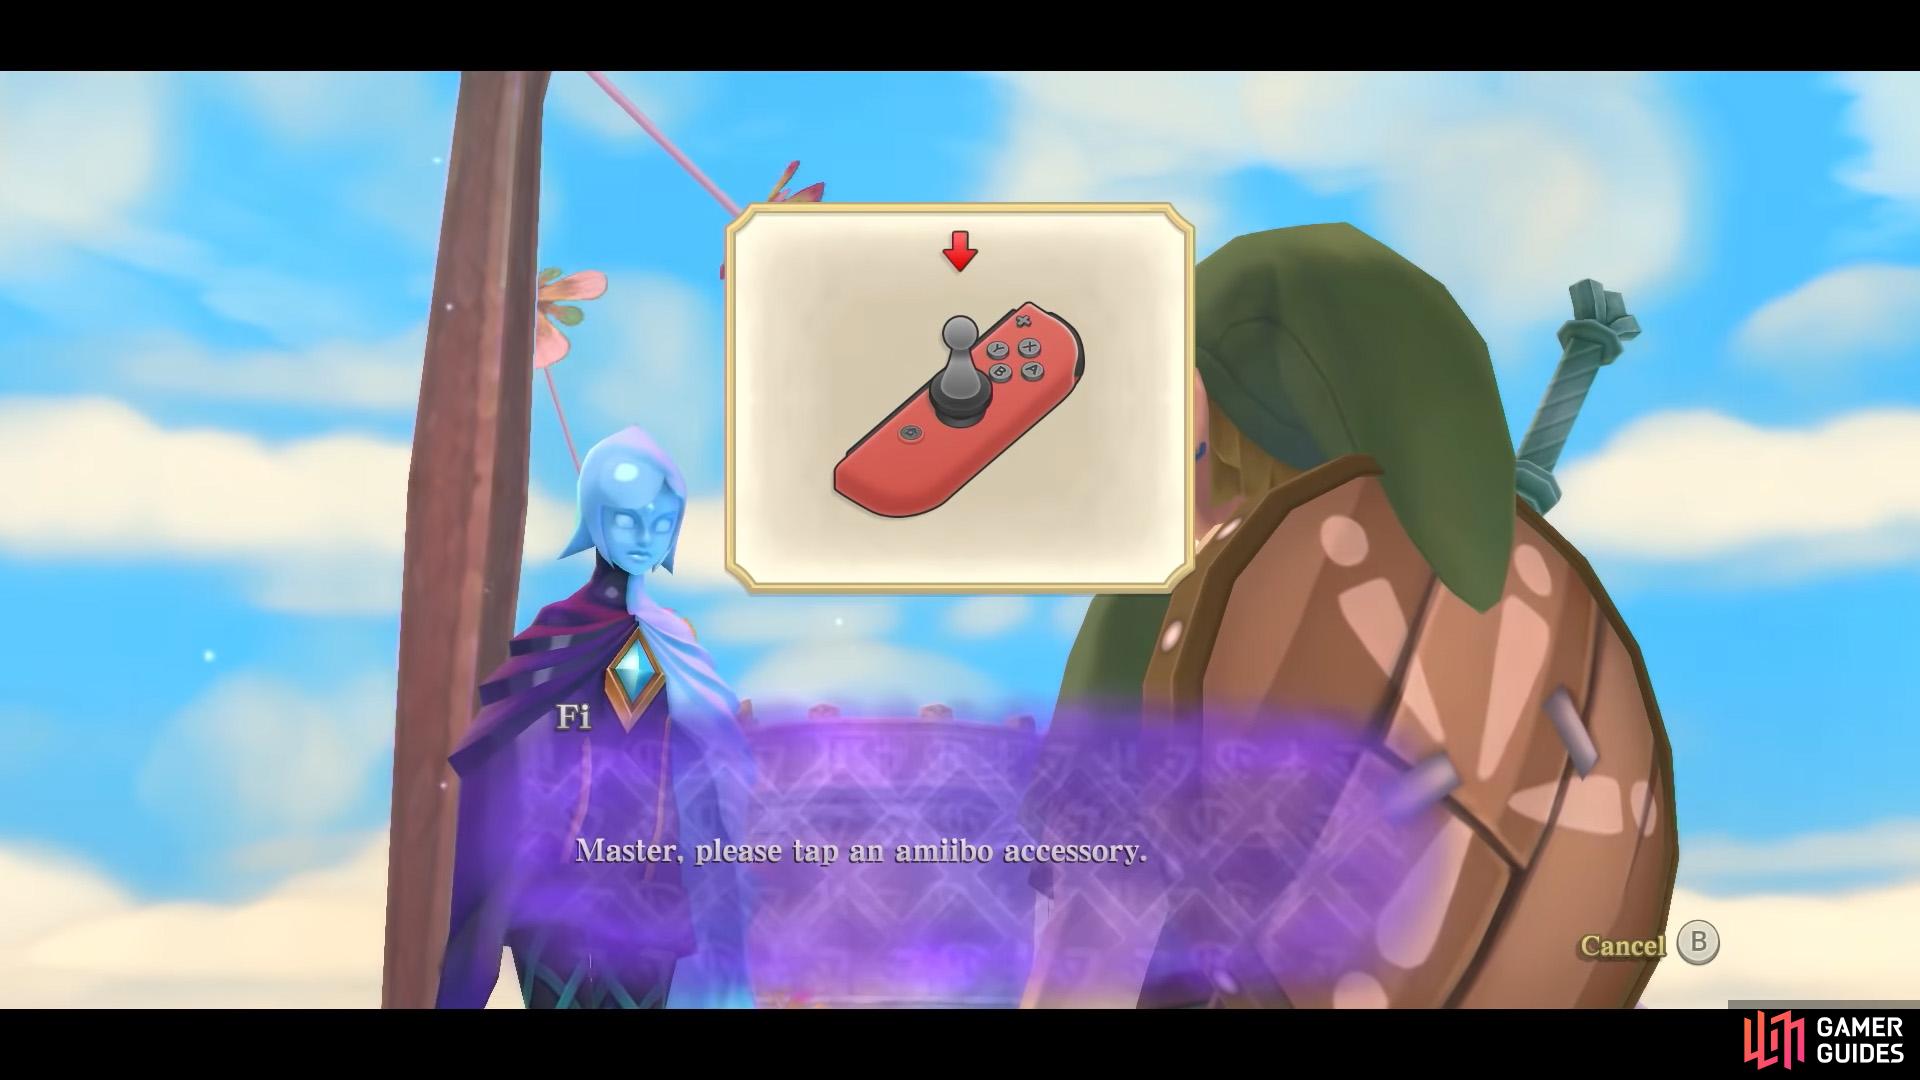 Anyway, you can scan the amiibo by summoning Fi with the D-pad.